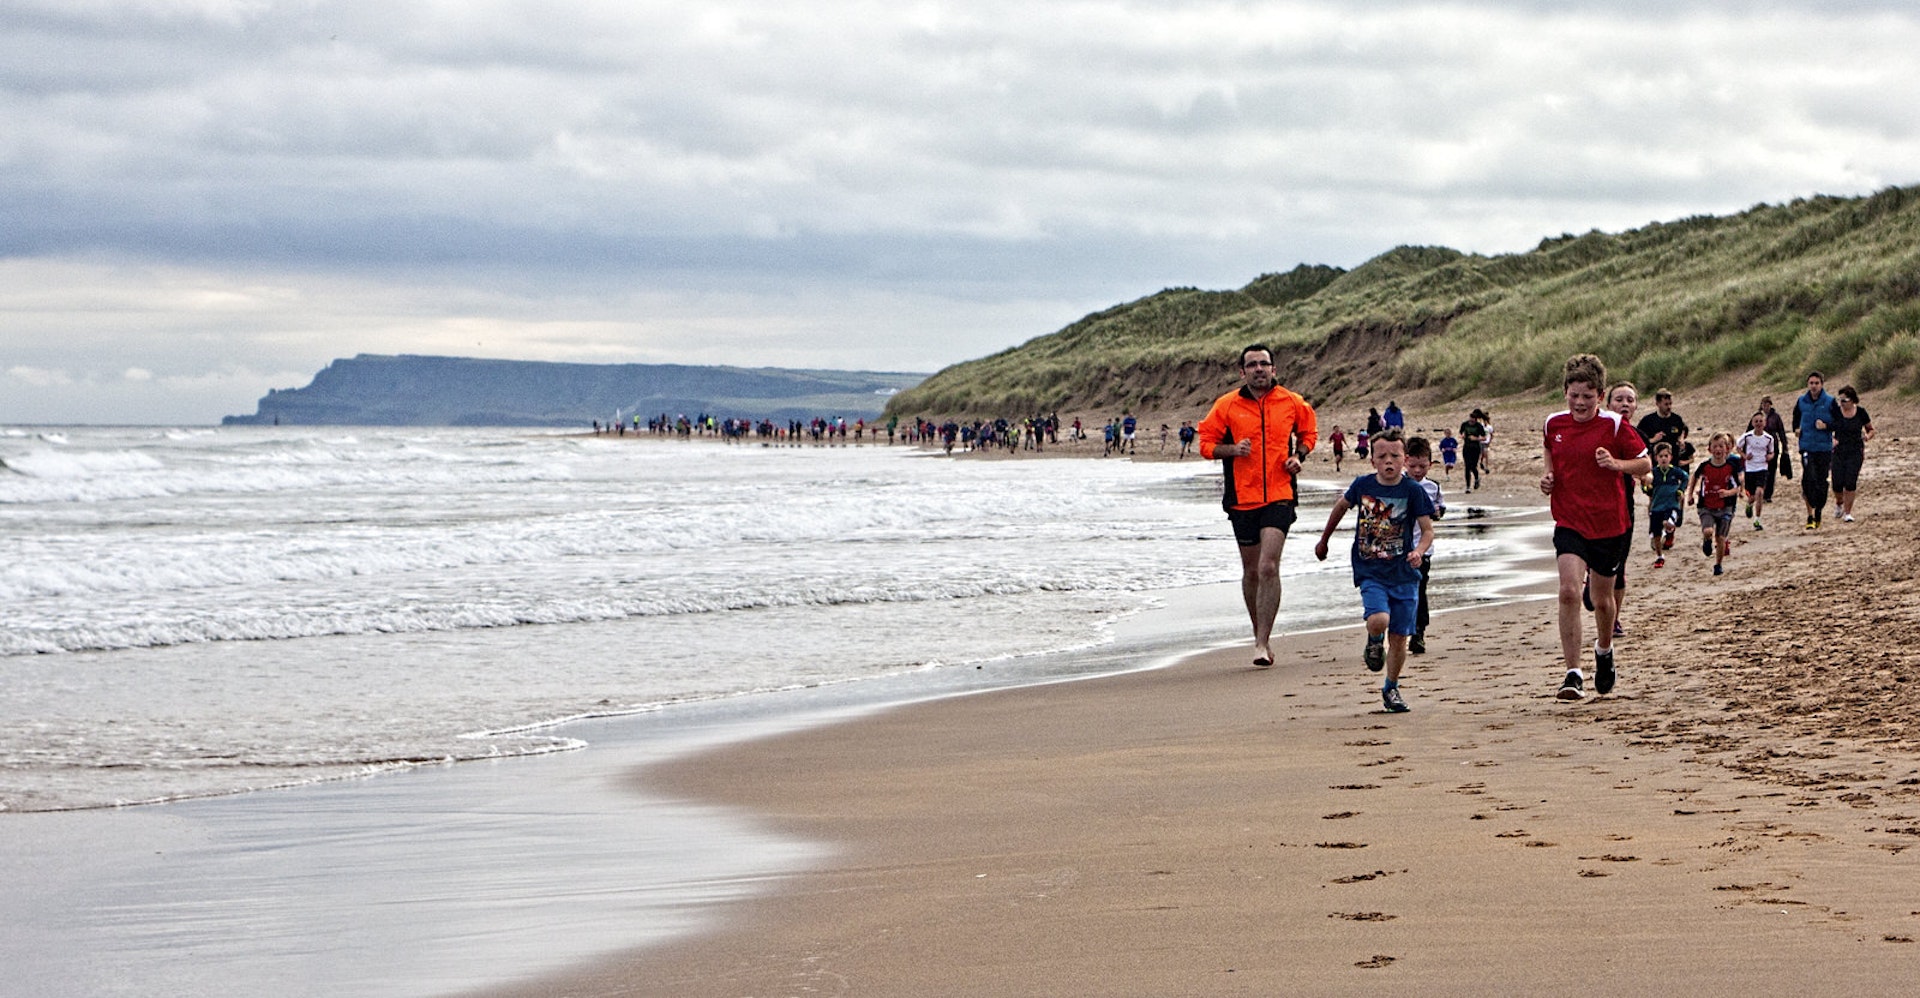 Runners, approaching the camera, stretch out along the beach in Portrush; at the front are some children, with a middle-aged man in bright orange running barefoot